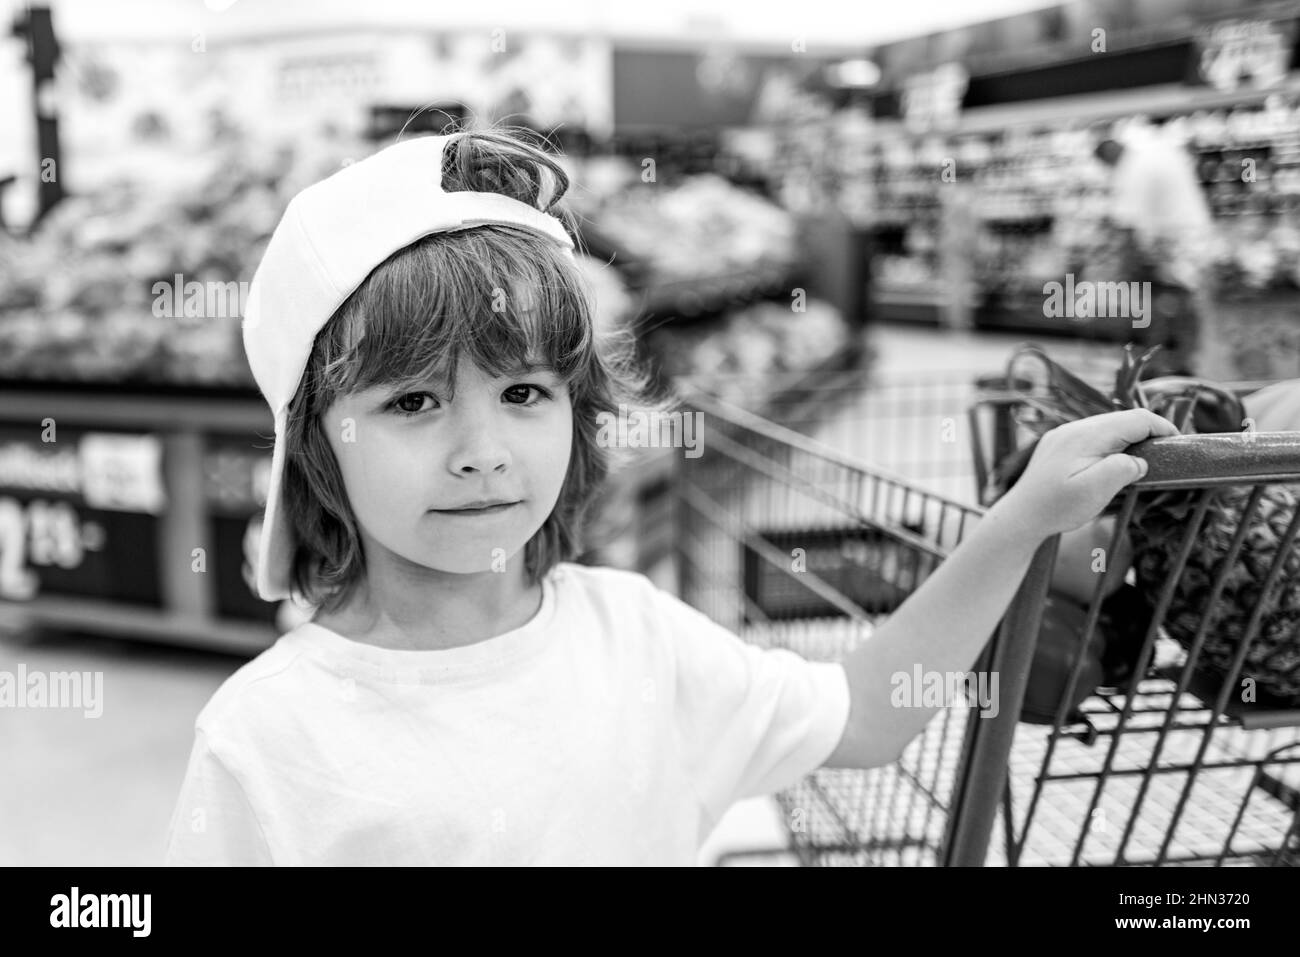 Food store or a supermarket choosing fresh organic carrots. Healthy lifestyle for kids. A boy is shopping in a supermarket. Stock Photo